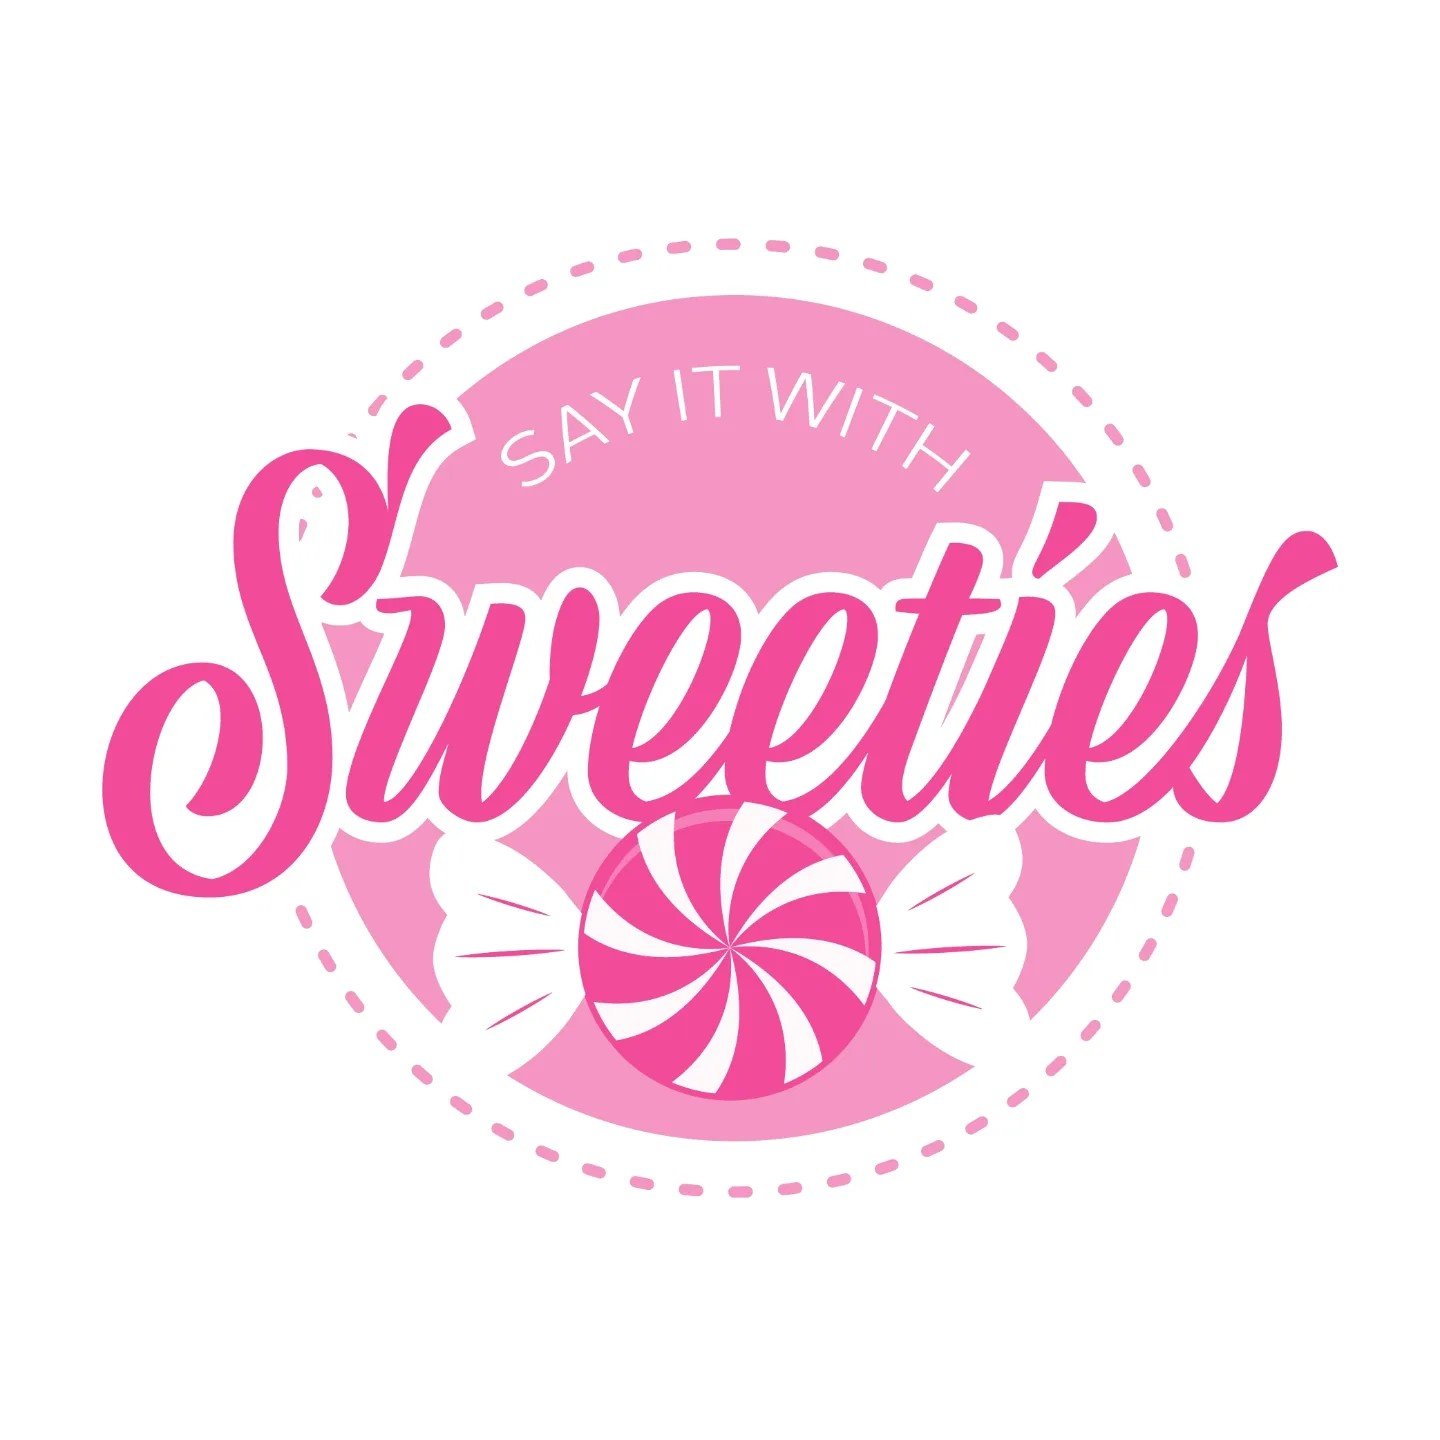 Say it with sweeties